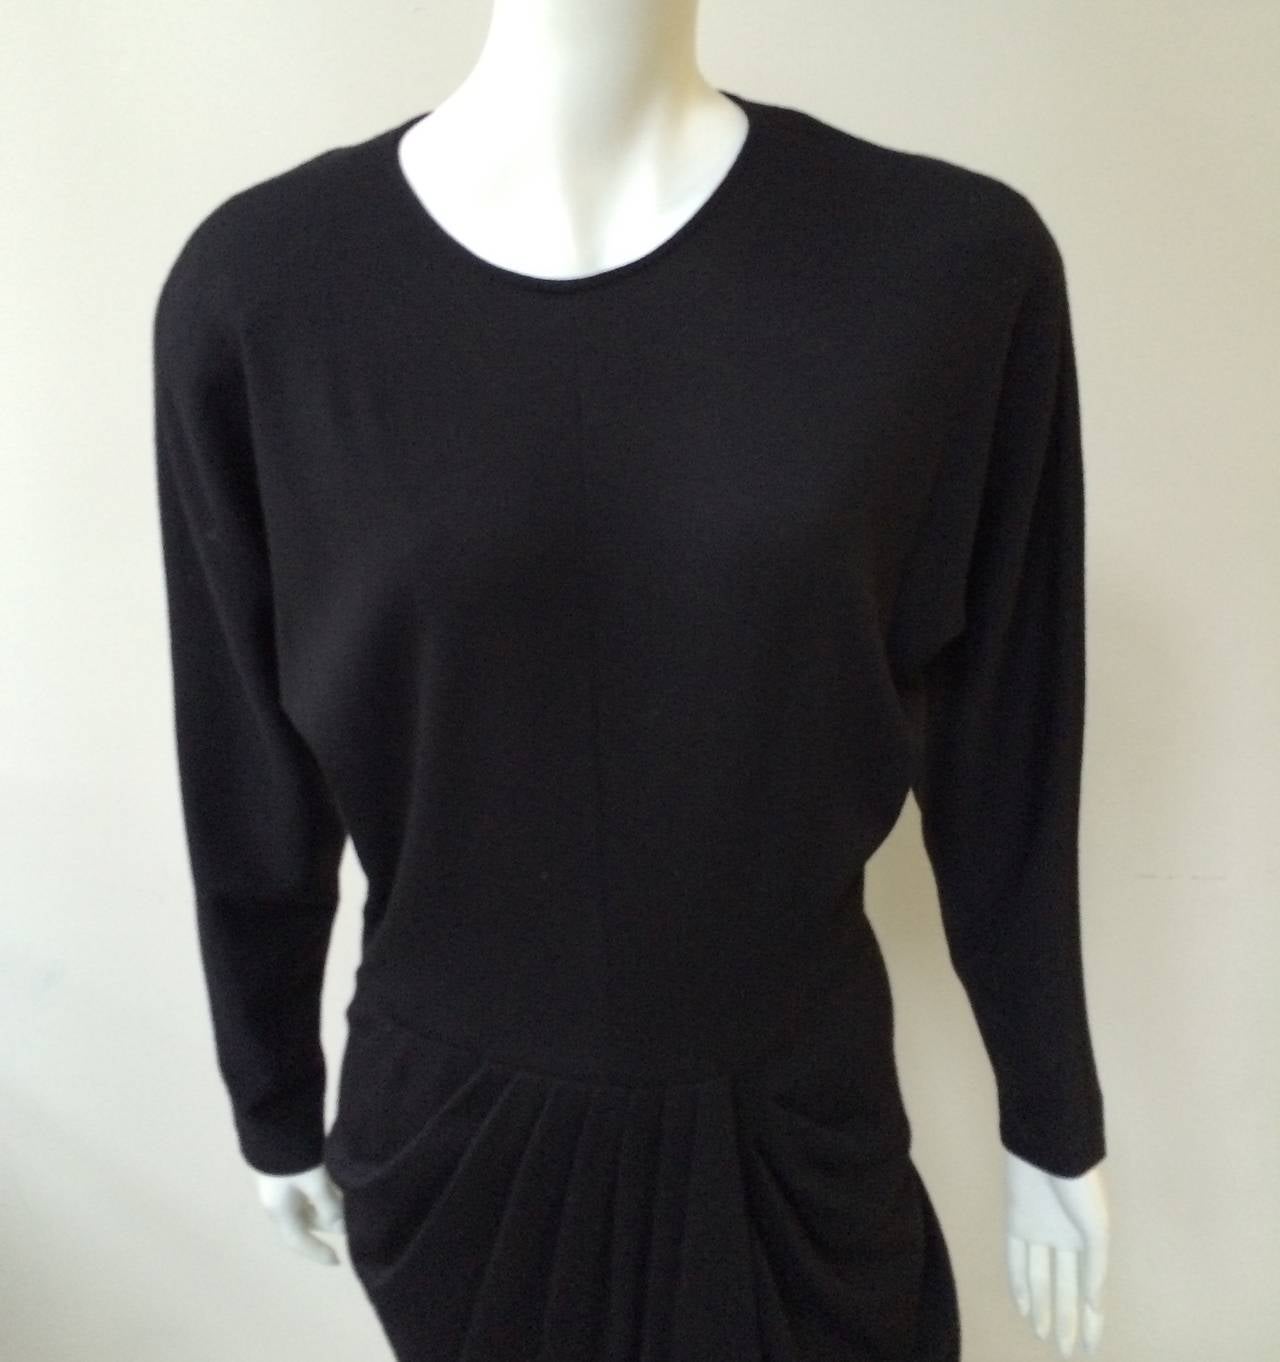 Christian Dior coordonnes 1980s black wool knit jersey is a size 6. Ladies please grab your tape measure so you can properly measure your bust, waist, hips & length to make certain this will fit your body. Made in Italy.  Mild shoulder pads that can